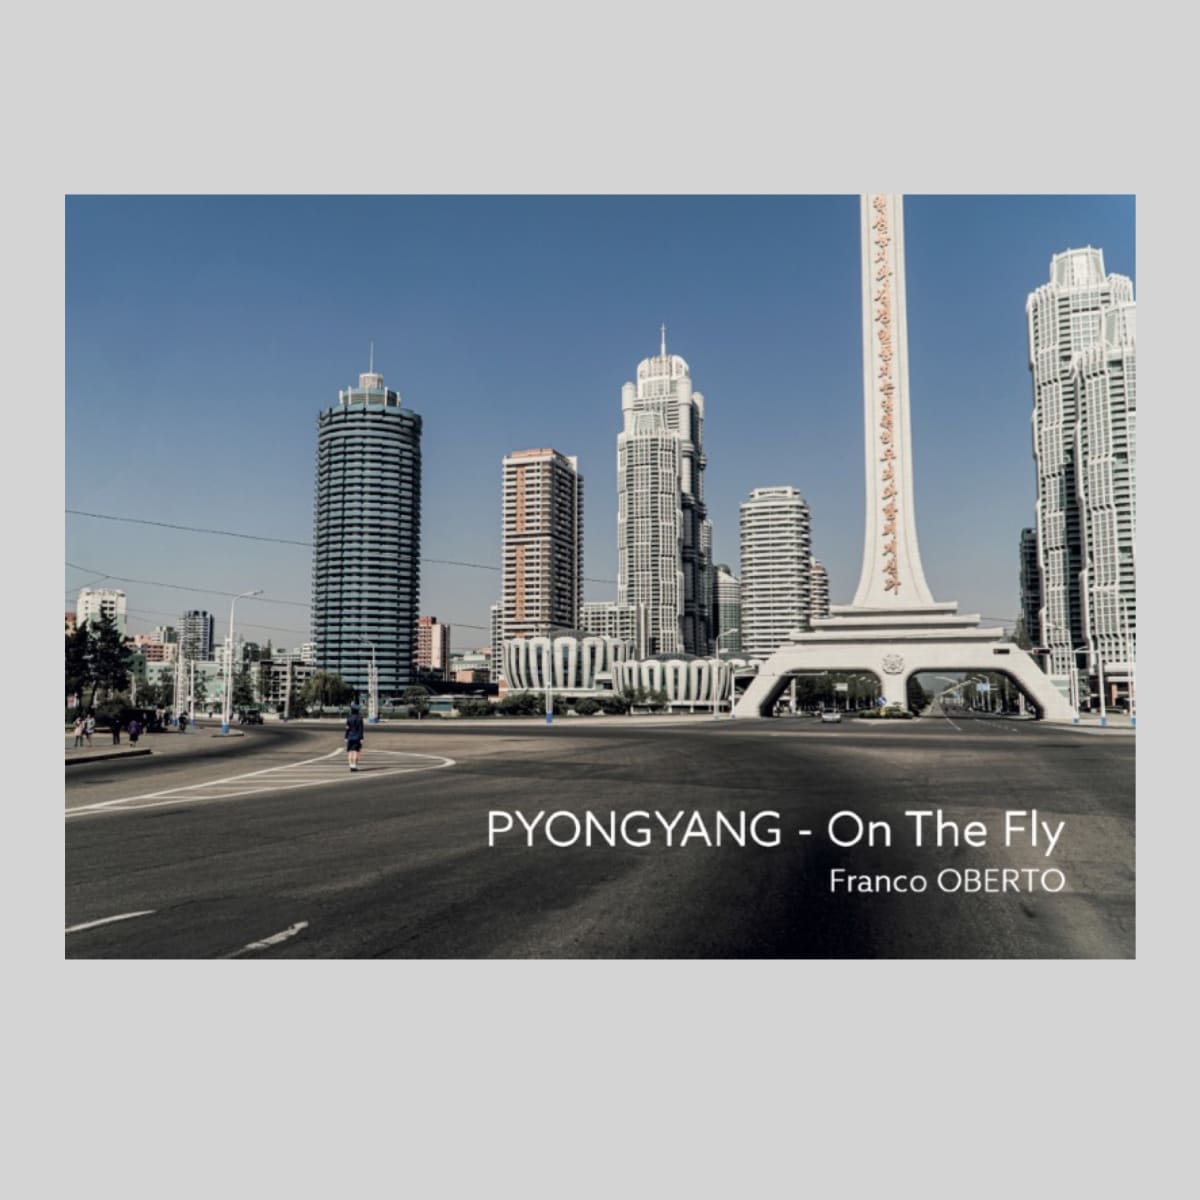 Pyongyang, On The Fly